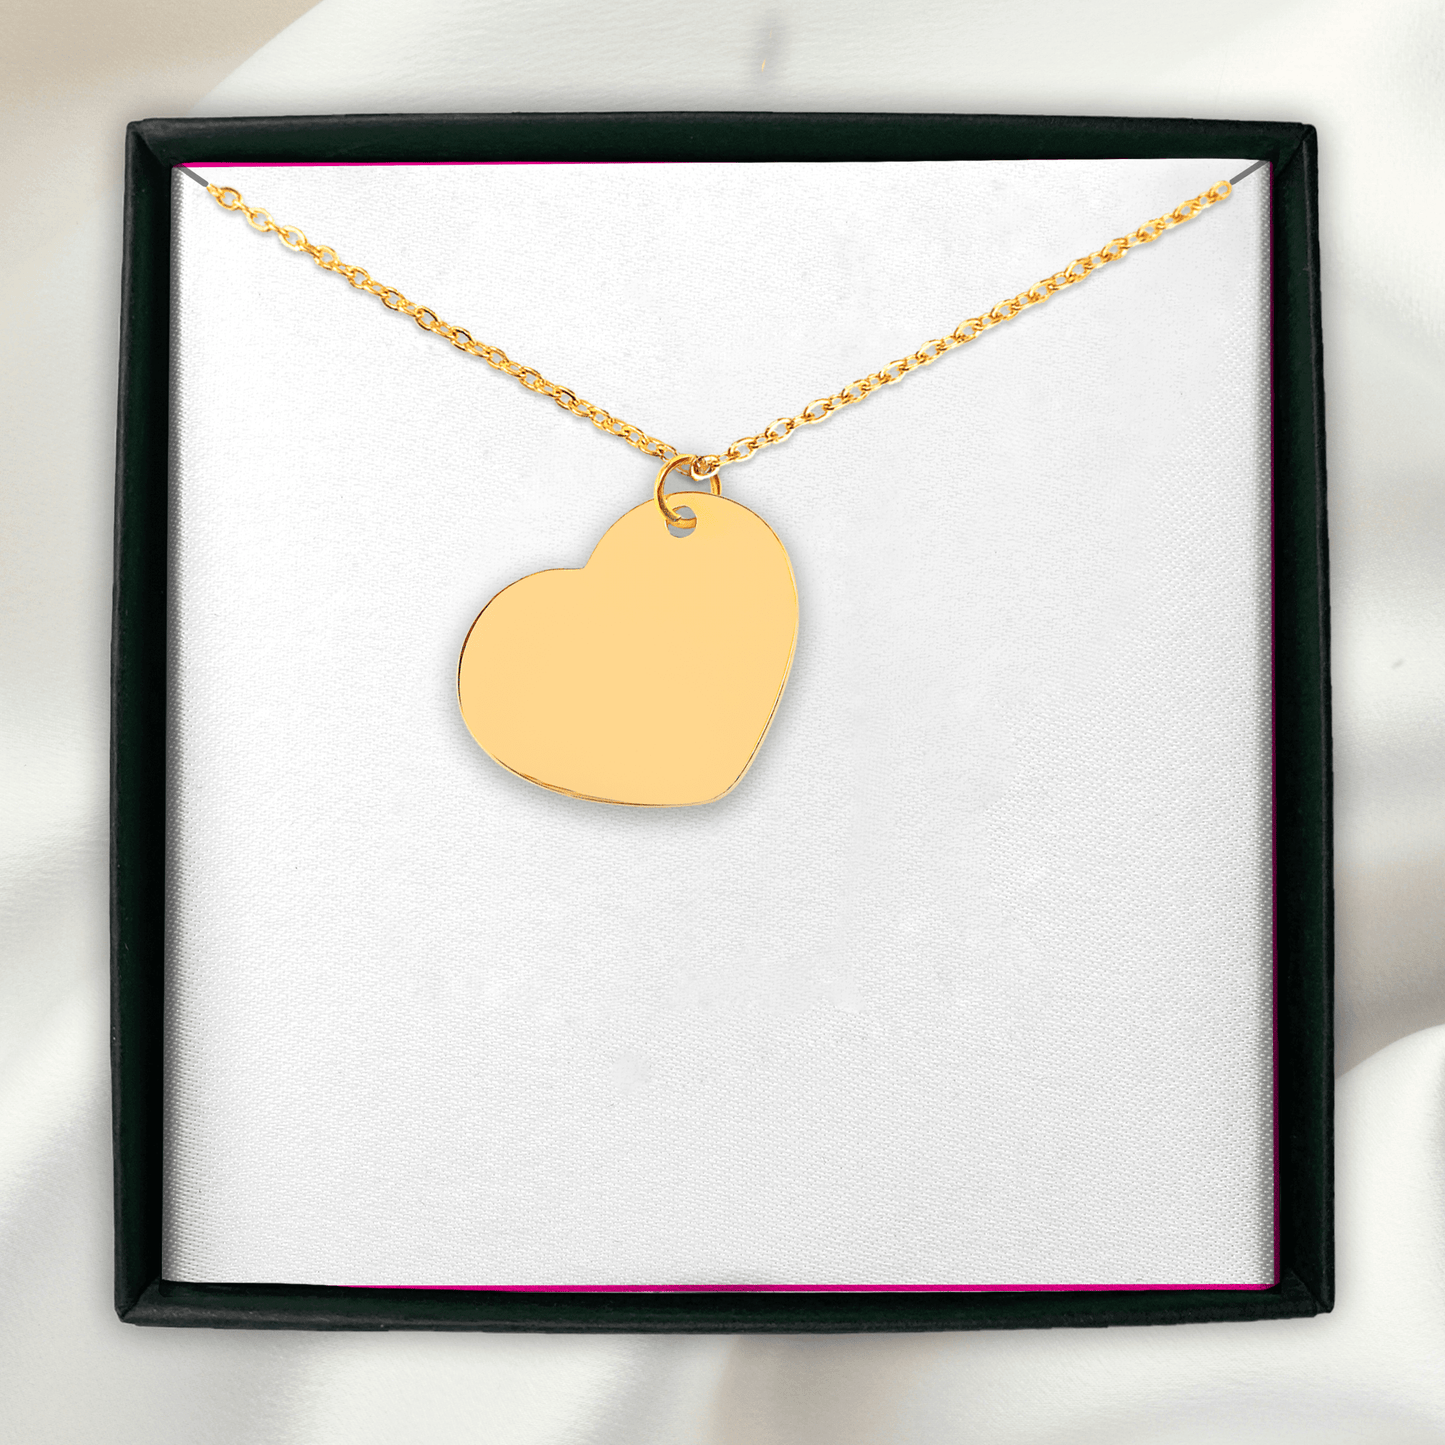 Sell your own design - Heart Necklace